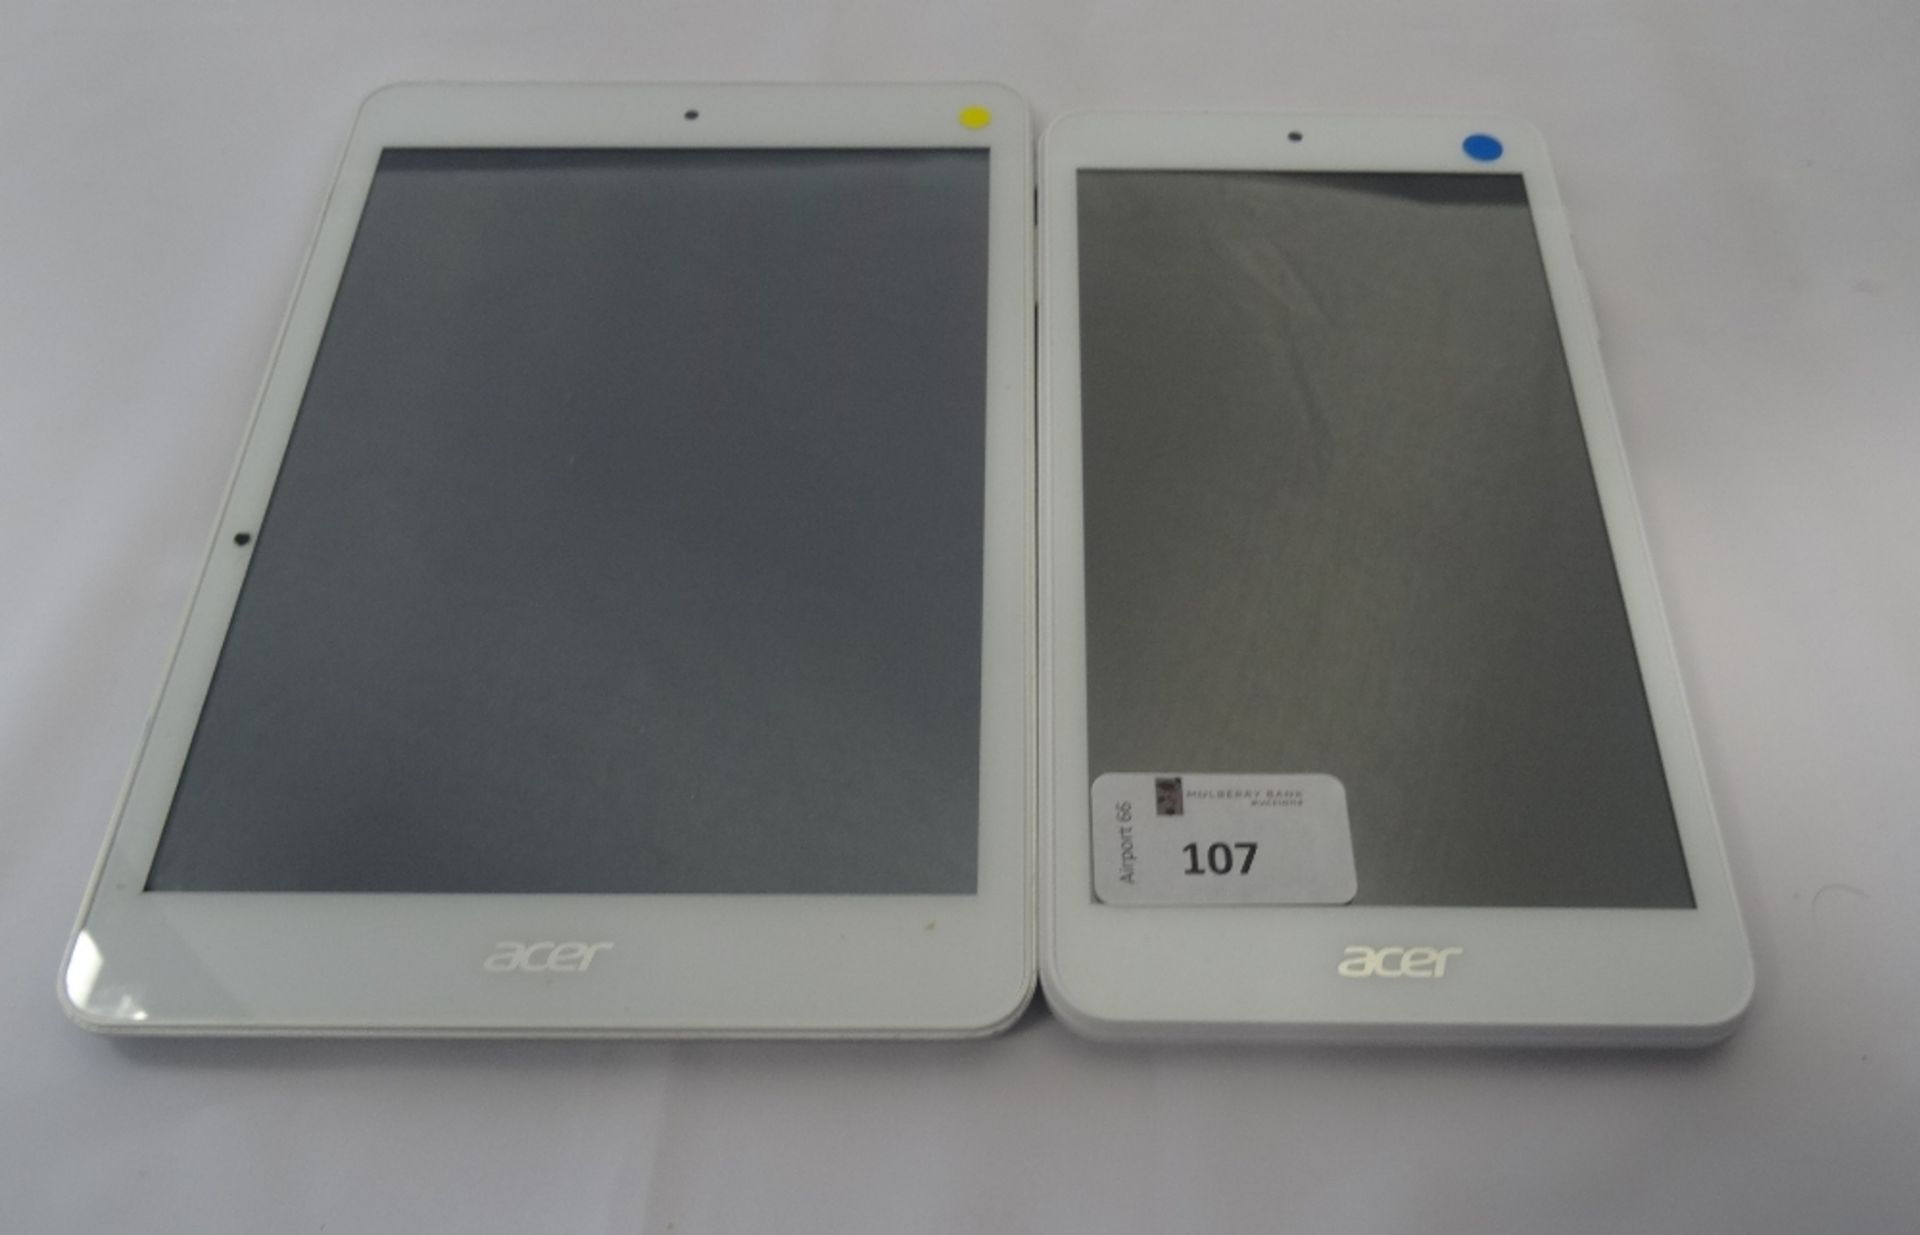 TWO ACER ICONIA TABLETS